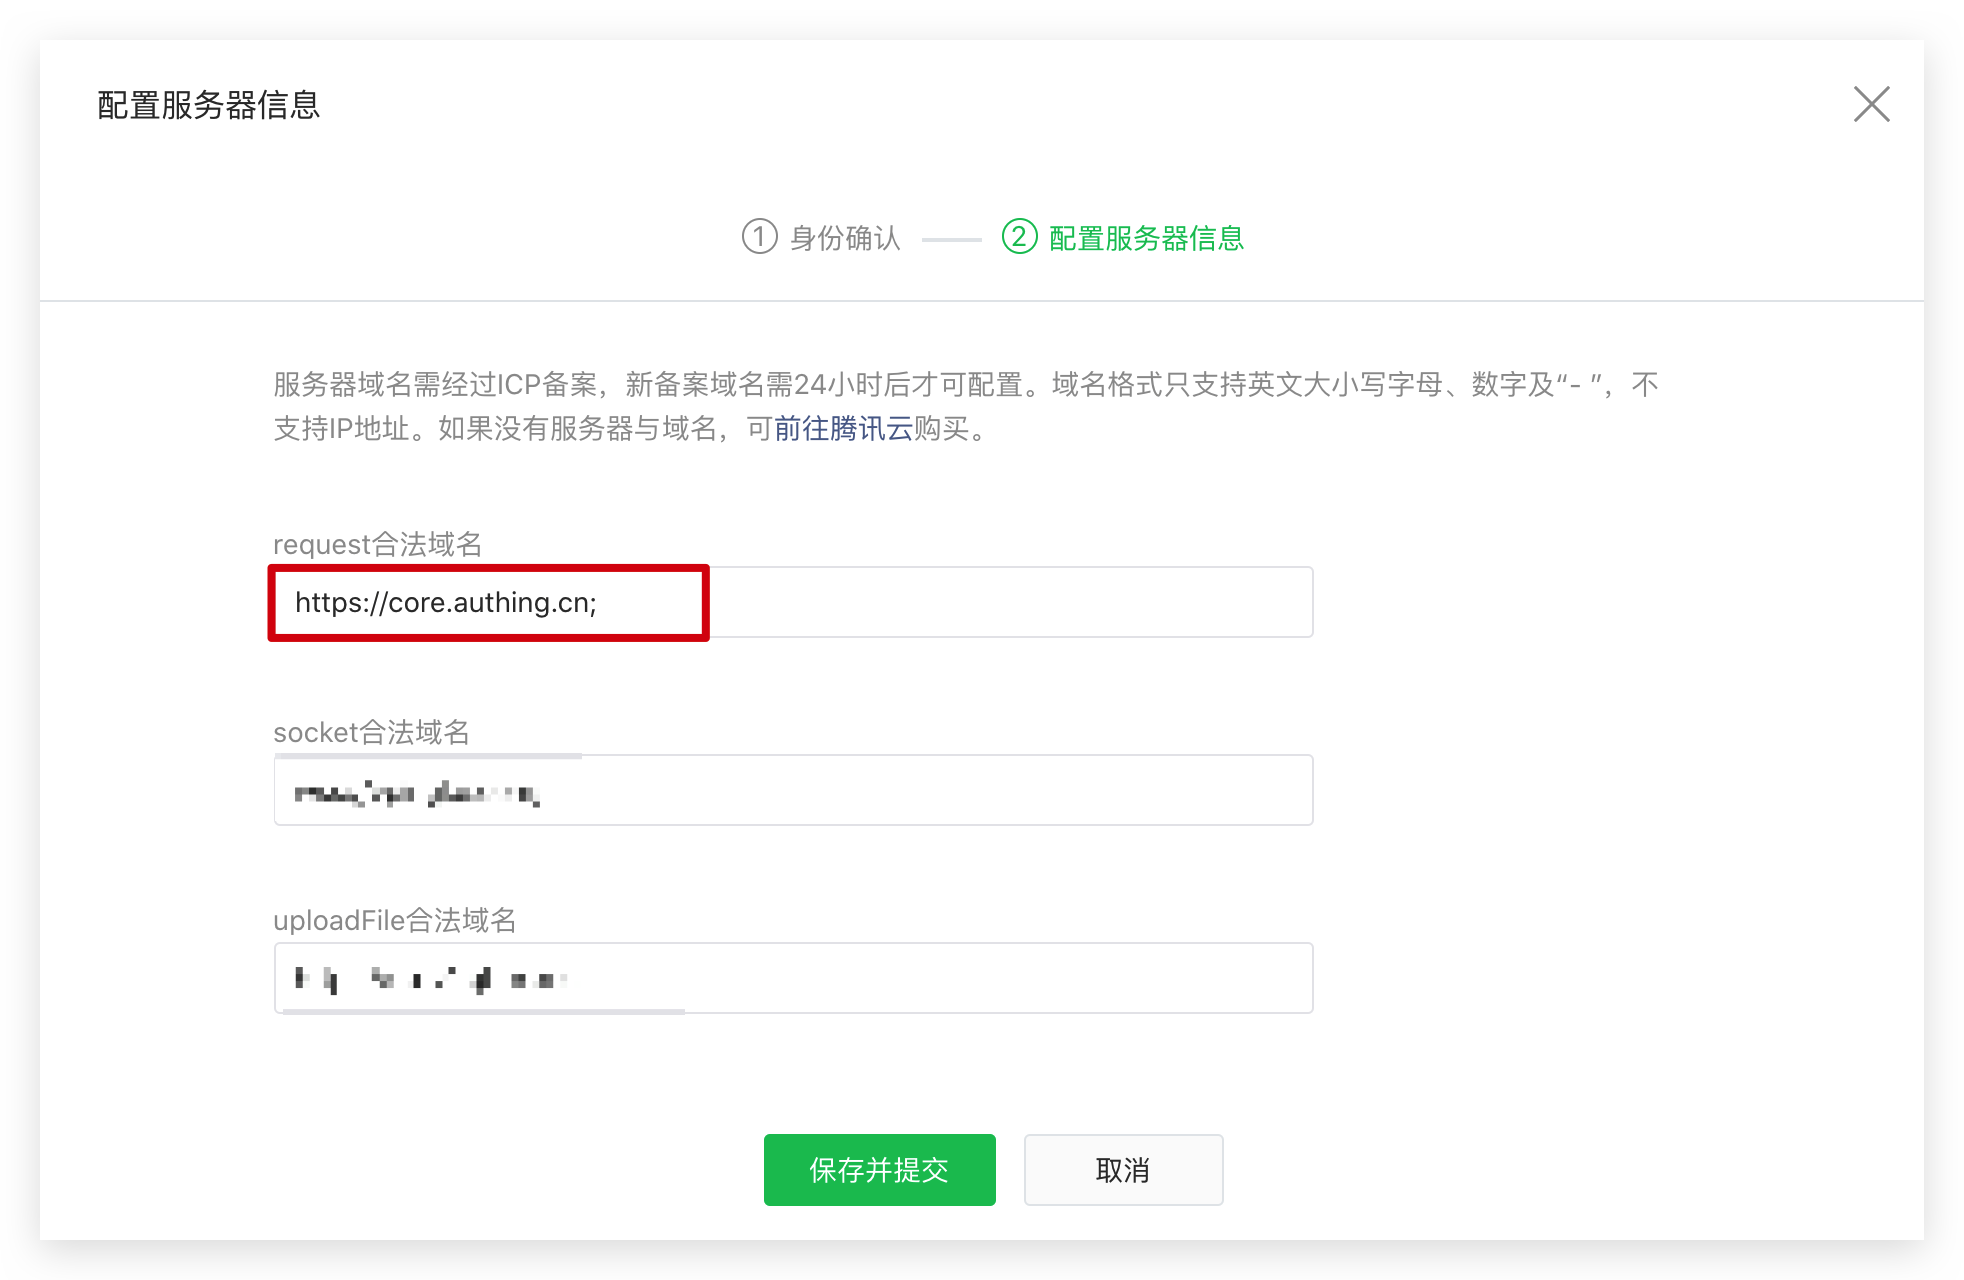 Five lines of code to access WeChat login in a small program